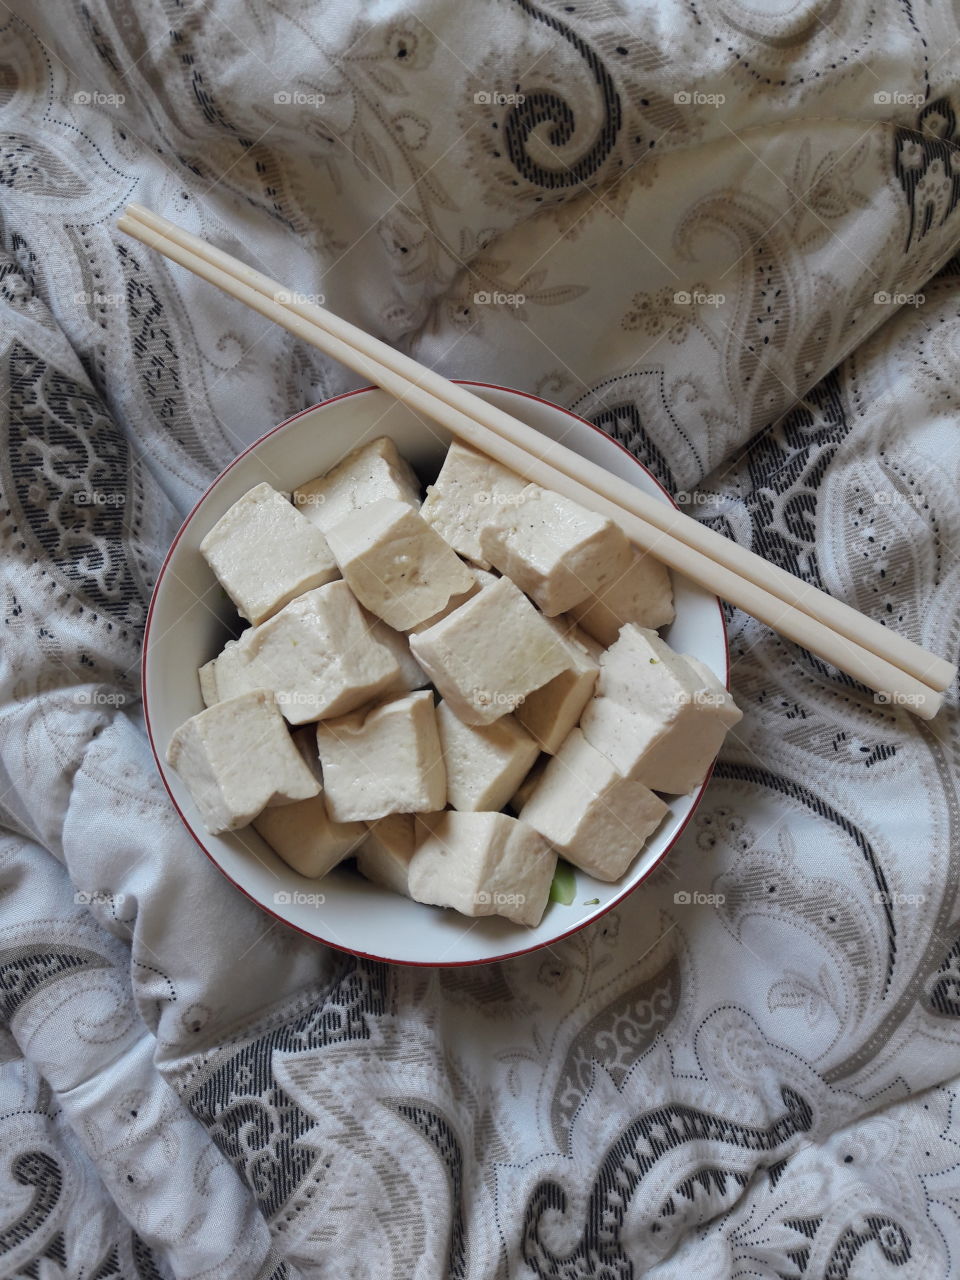 some tofu for better day